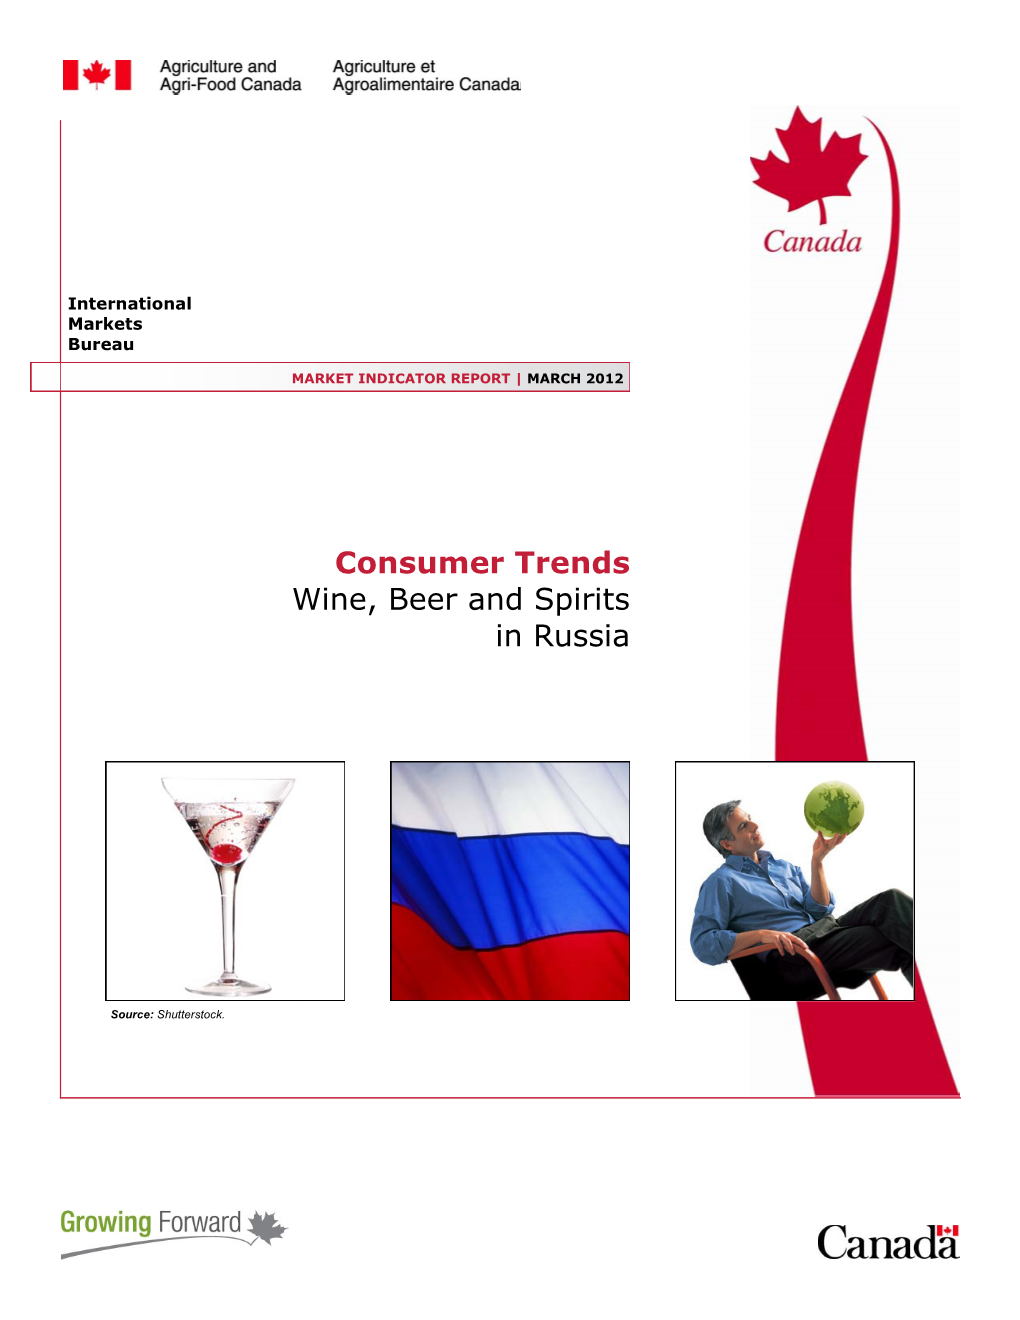 Consumer Trends Wine, Beer and Spirits in Russia